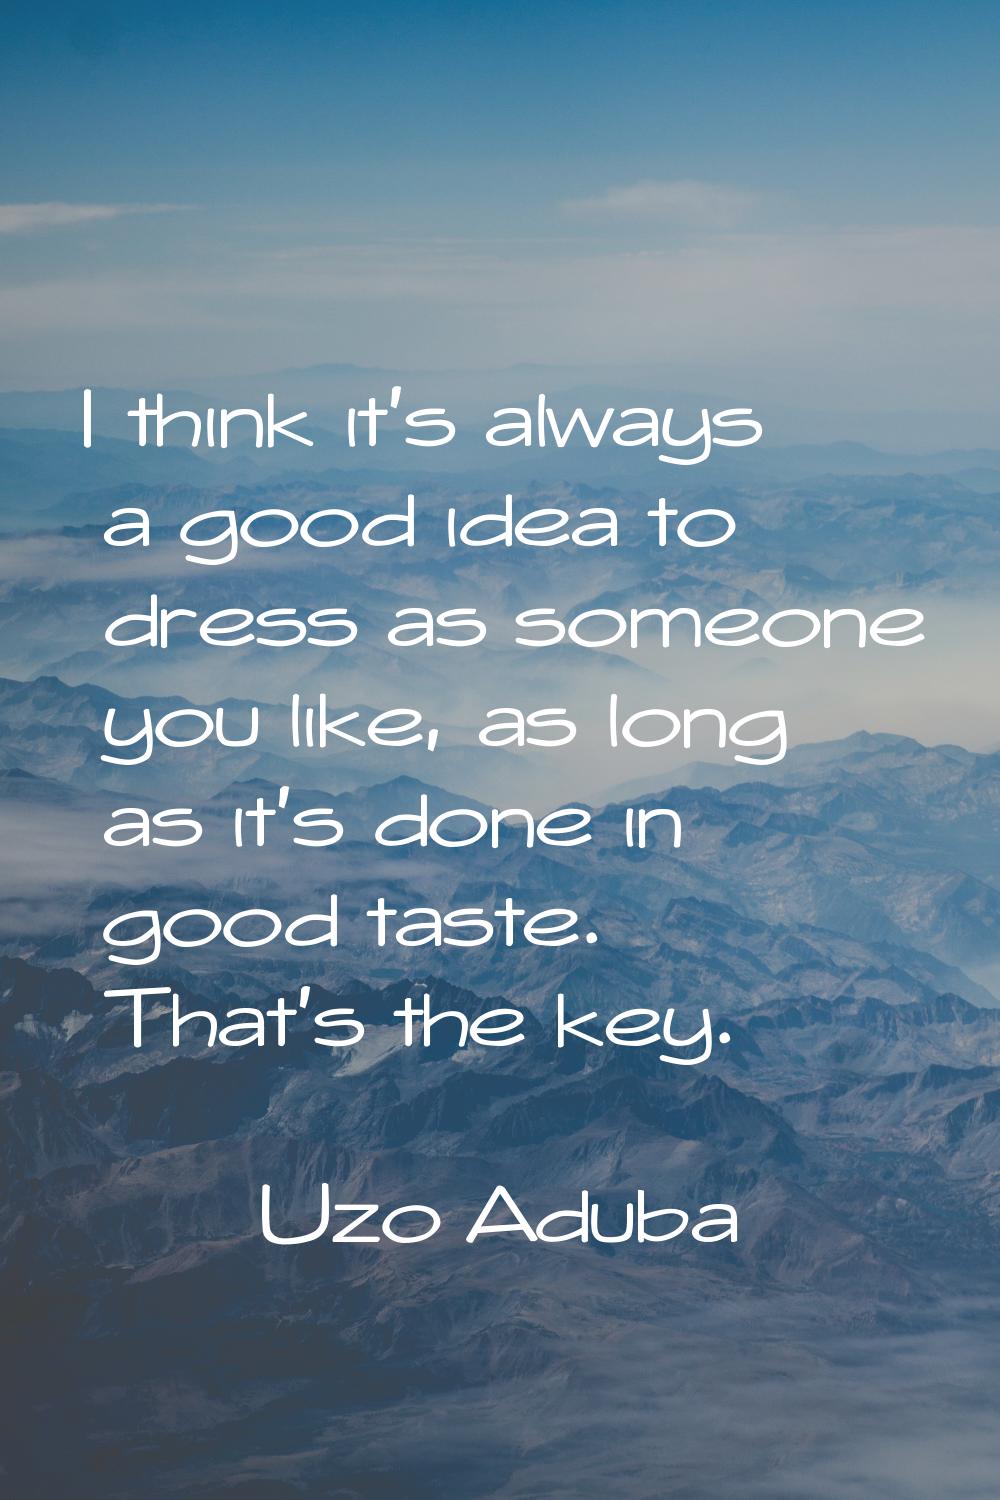 I think it's always a good idea to dress as someone you like, as long as it's done in good taste. T